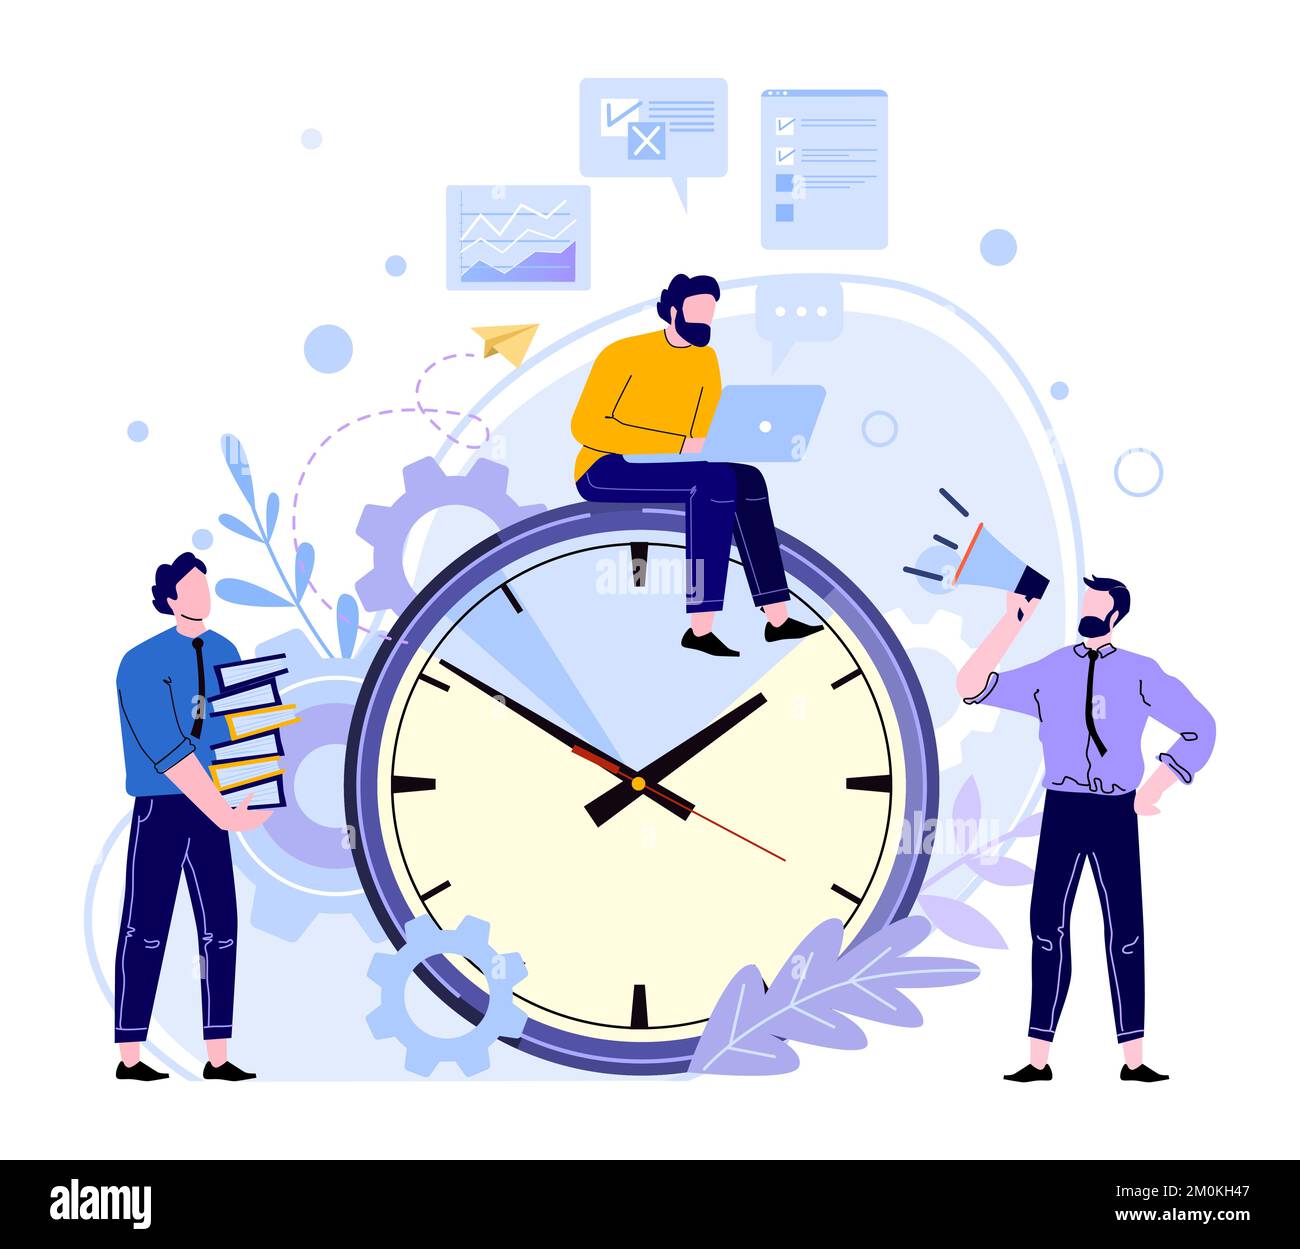 Organized office work. Employee sitting at big clock and working at laptop to meet deadline. Manager holding loudspeaker Stock Vector